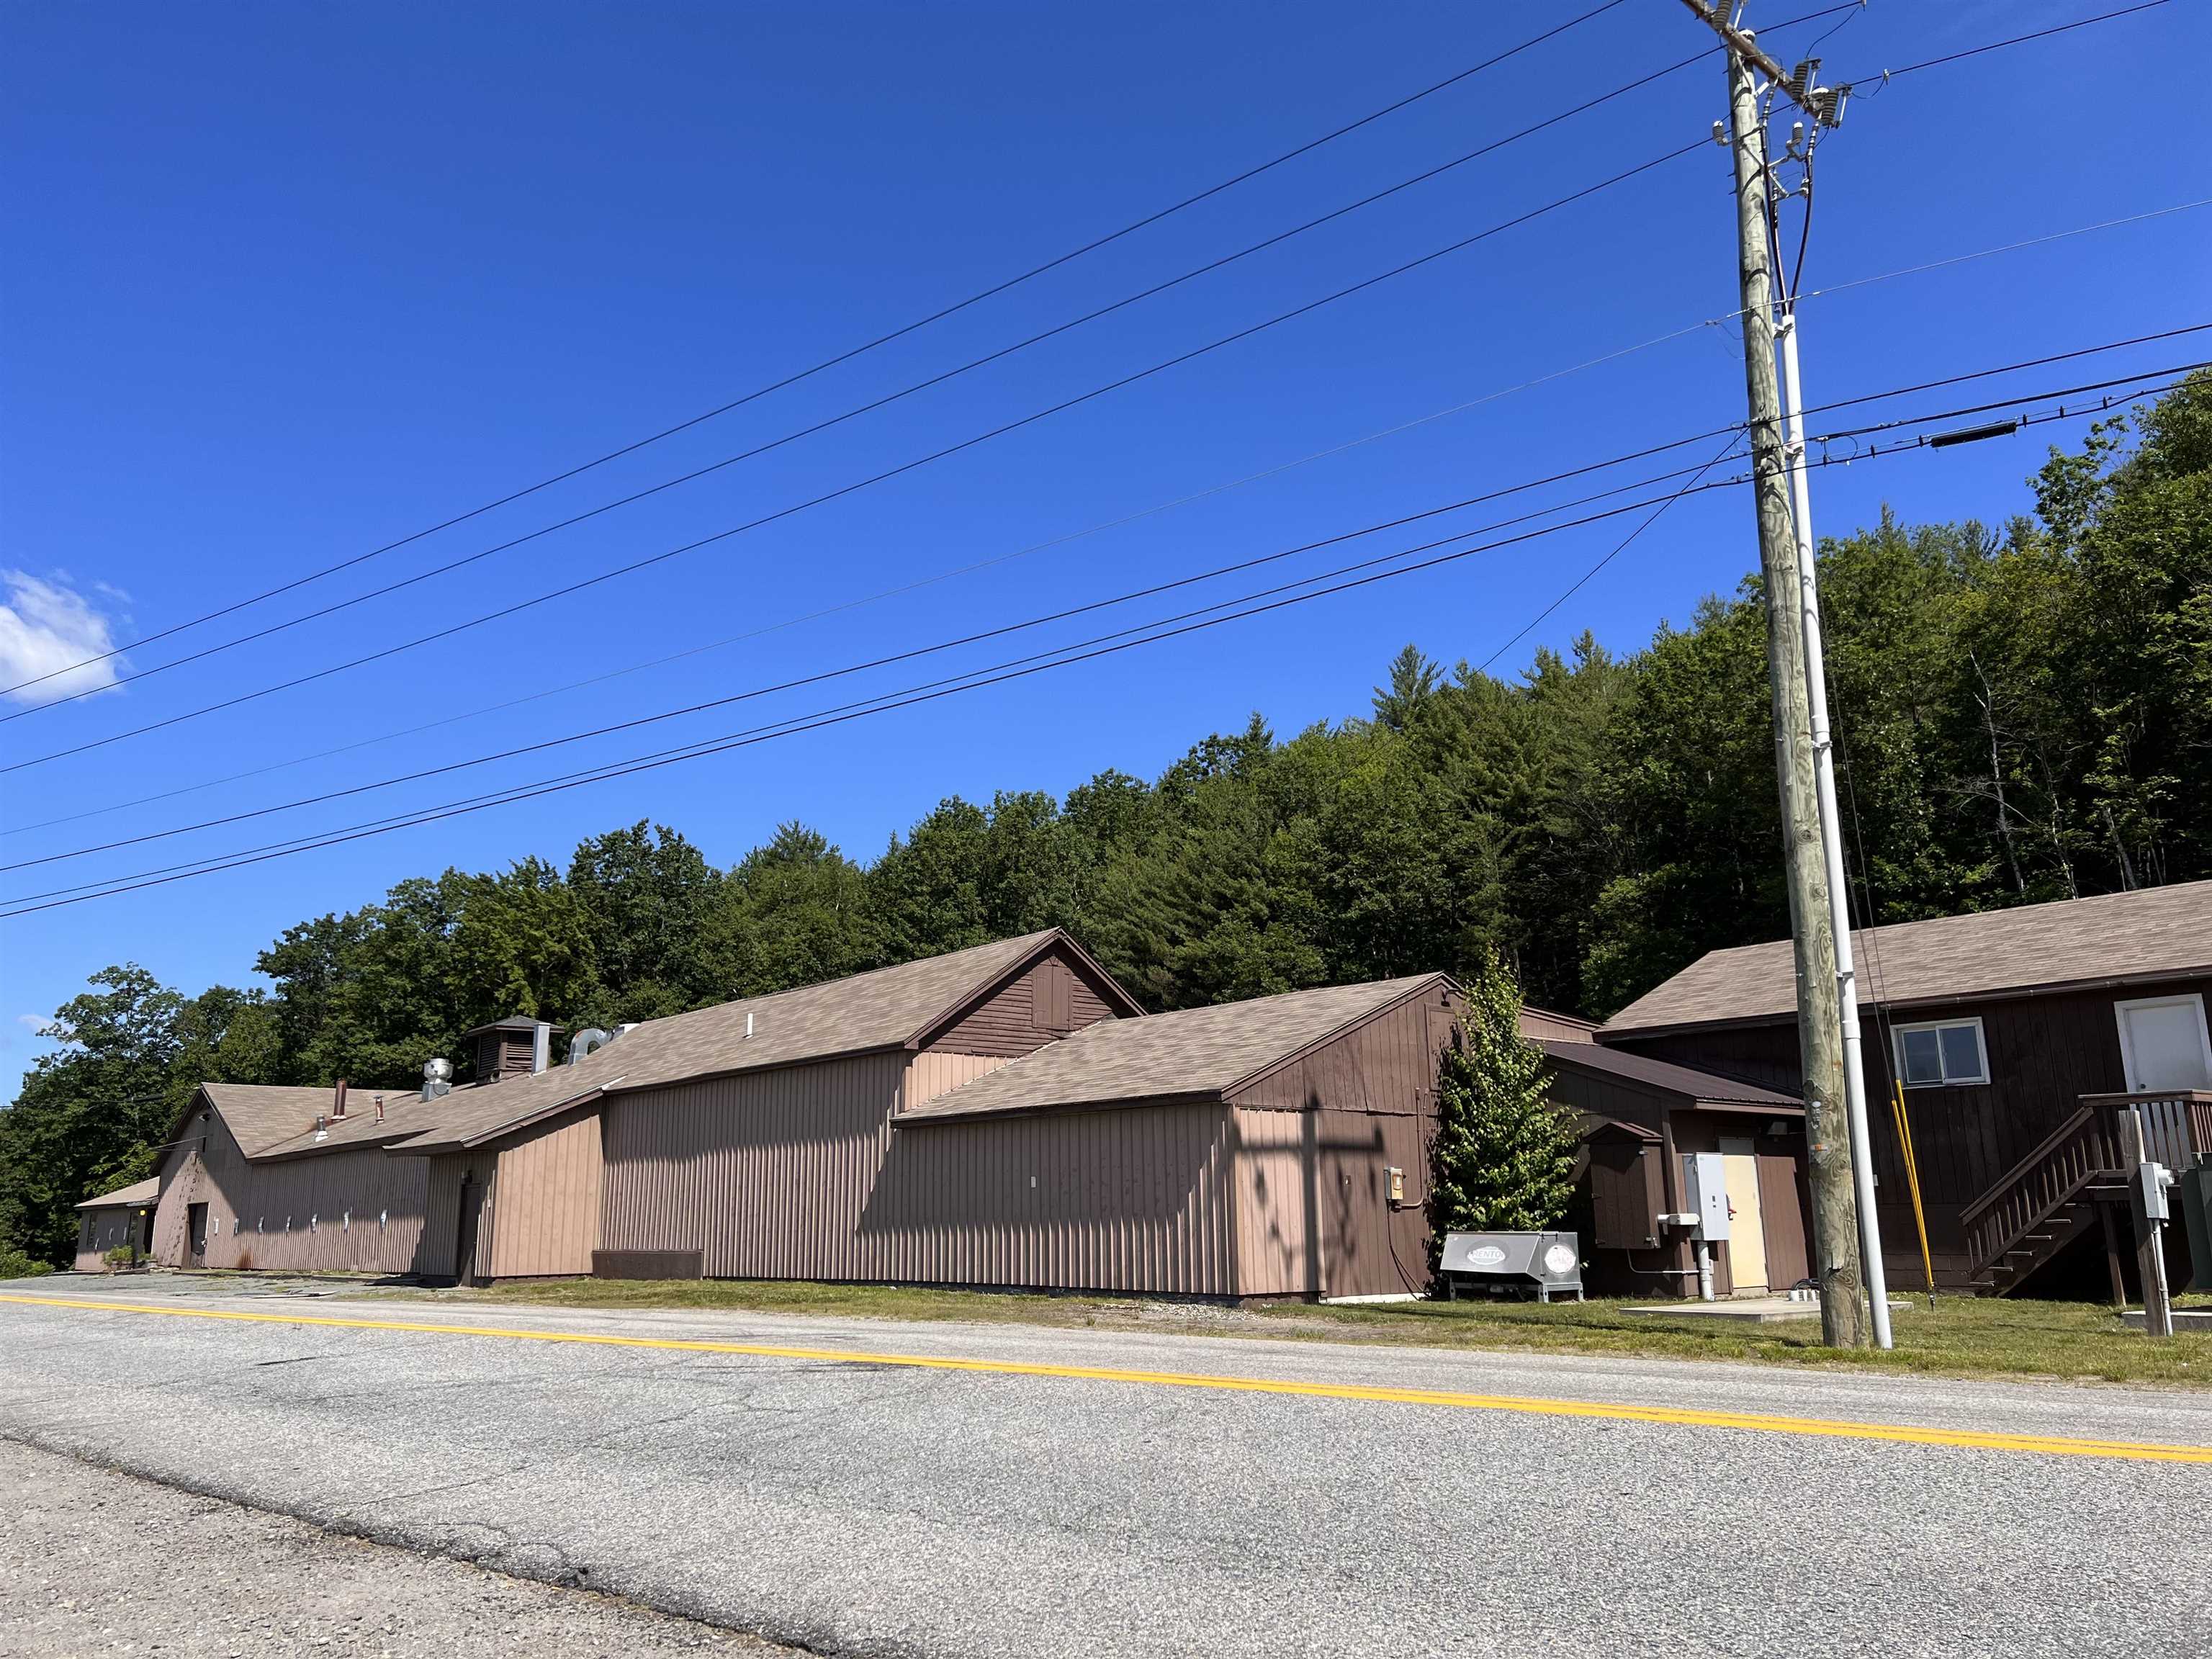 Claremont NH 03743 Commercial Property for sale $List Price is $700,000